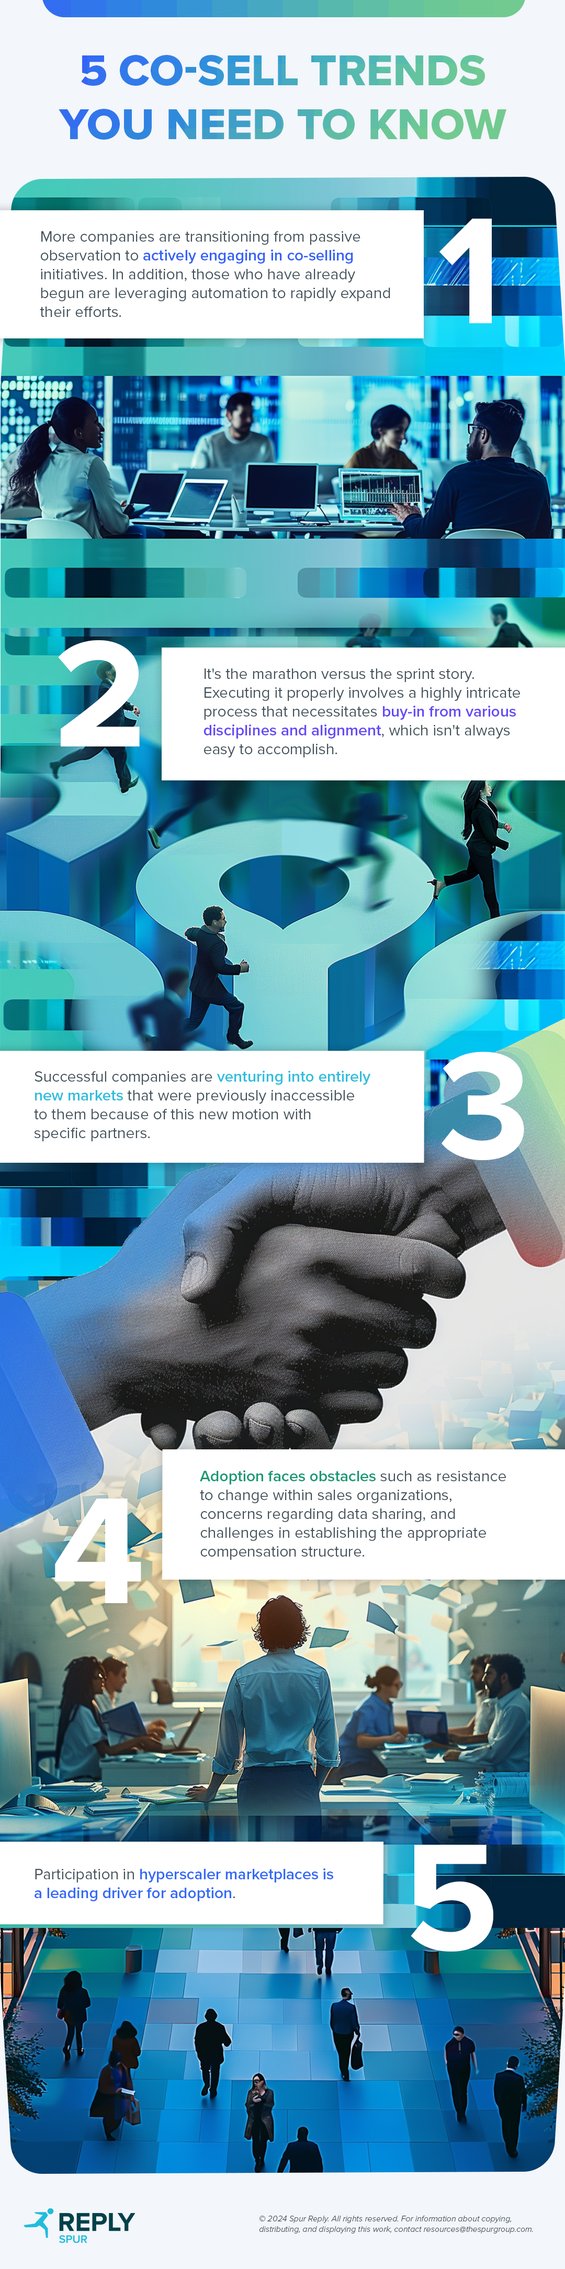 #1: More companies are transitioning from passive observation to actively engaging in co-selling initiatives. In addition, those who have already begun are leveraging automation to rapidly expand their efforts. #2: It's the marathon versus the sprint story. Executing it properly involves a highly intricate process that necessitates buy-in from various disciplines and alignment, which isn't always easy to accomplish. #3: Successful companies are venturing into entirely new markets that were previously inaccessible to them because of this new motion with specific partners.  #4: Adoption faces obstacles such as resistance to change within sales organizations, concerns regarding data sharing, and challenges in establishing the appropriate compensation structure. #5: Participation in hyperscaler marketplaces is a leading driver for adoption.  